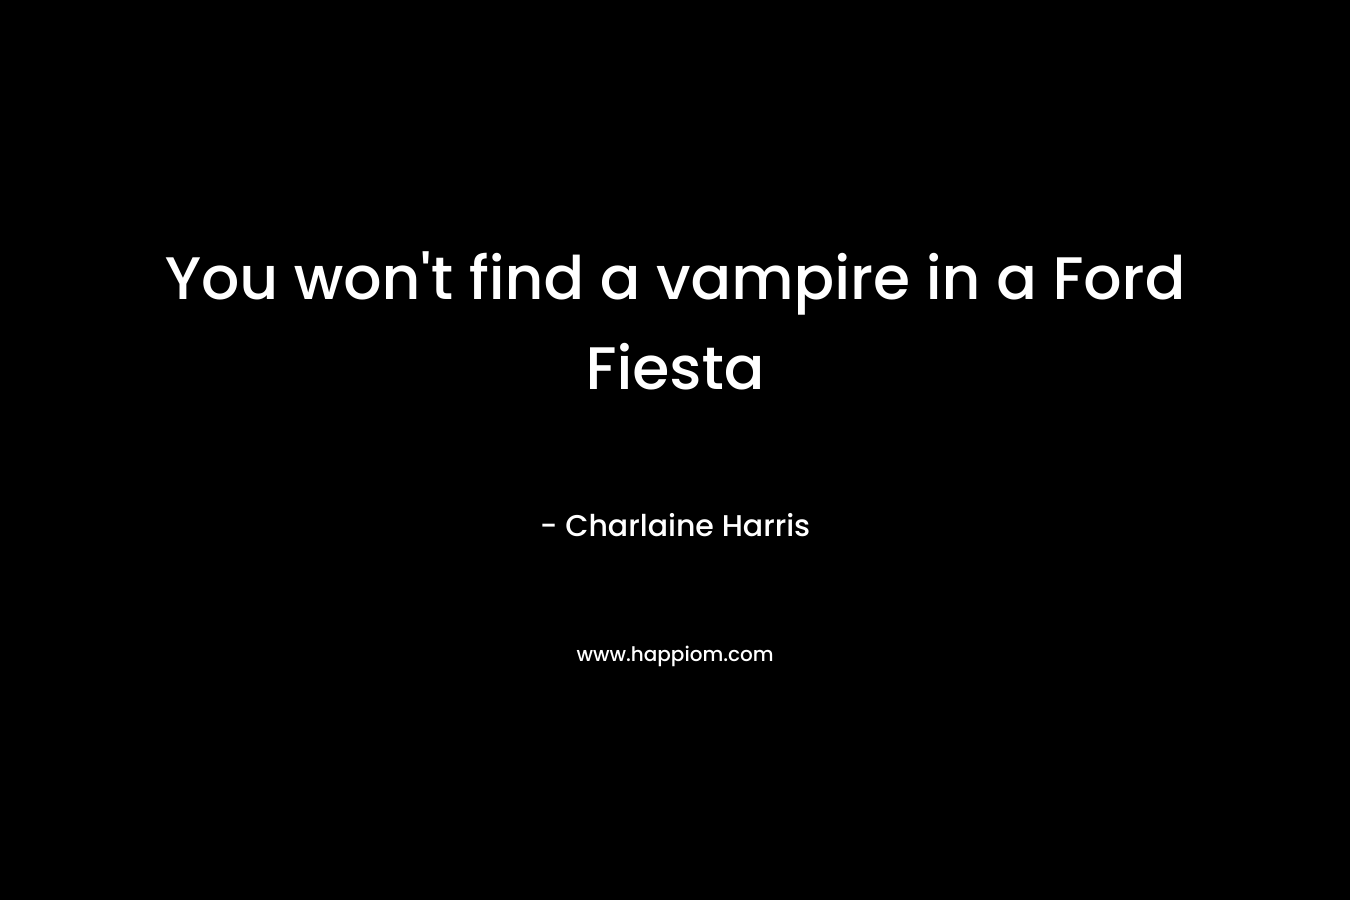 You won't find a vampire in a Ford Fiesta